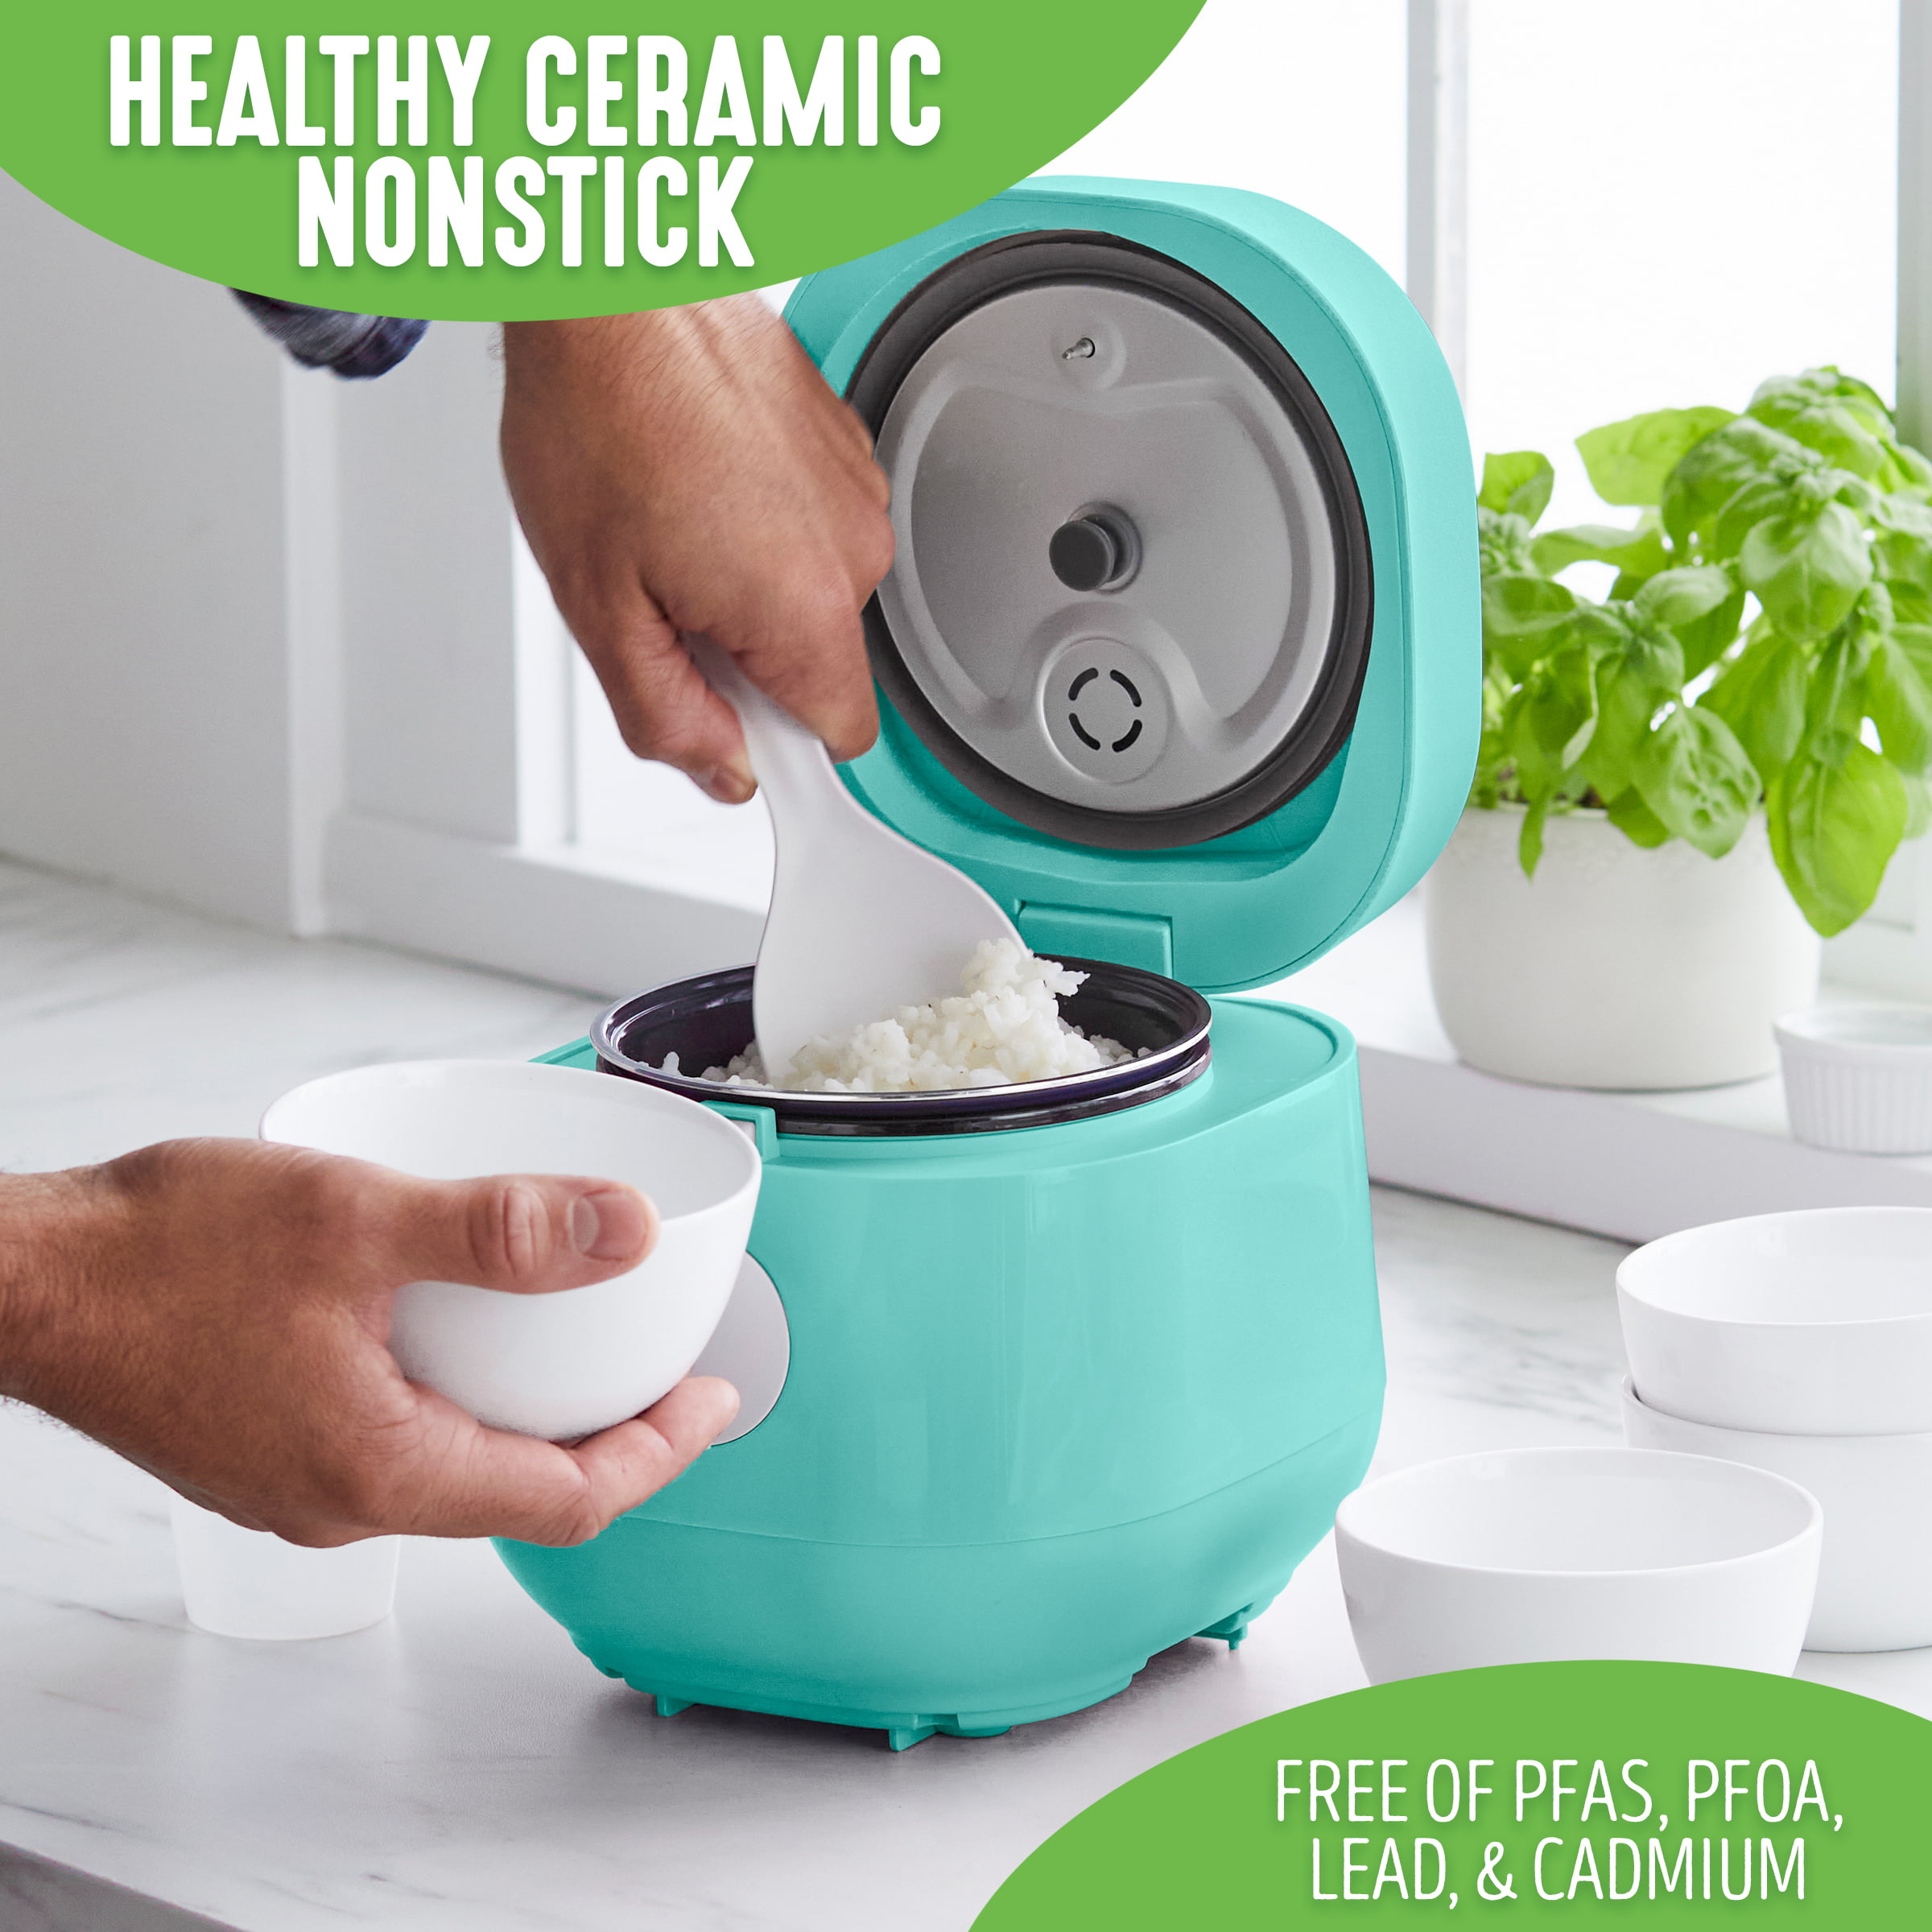 Green Life Rice Cooker